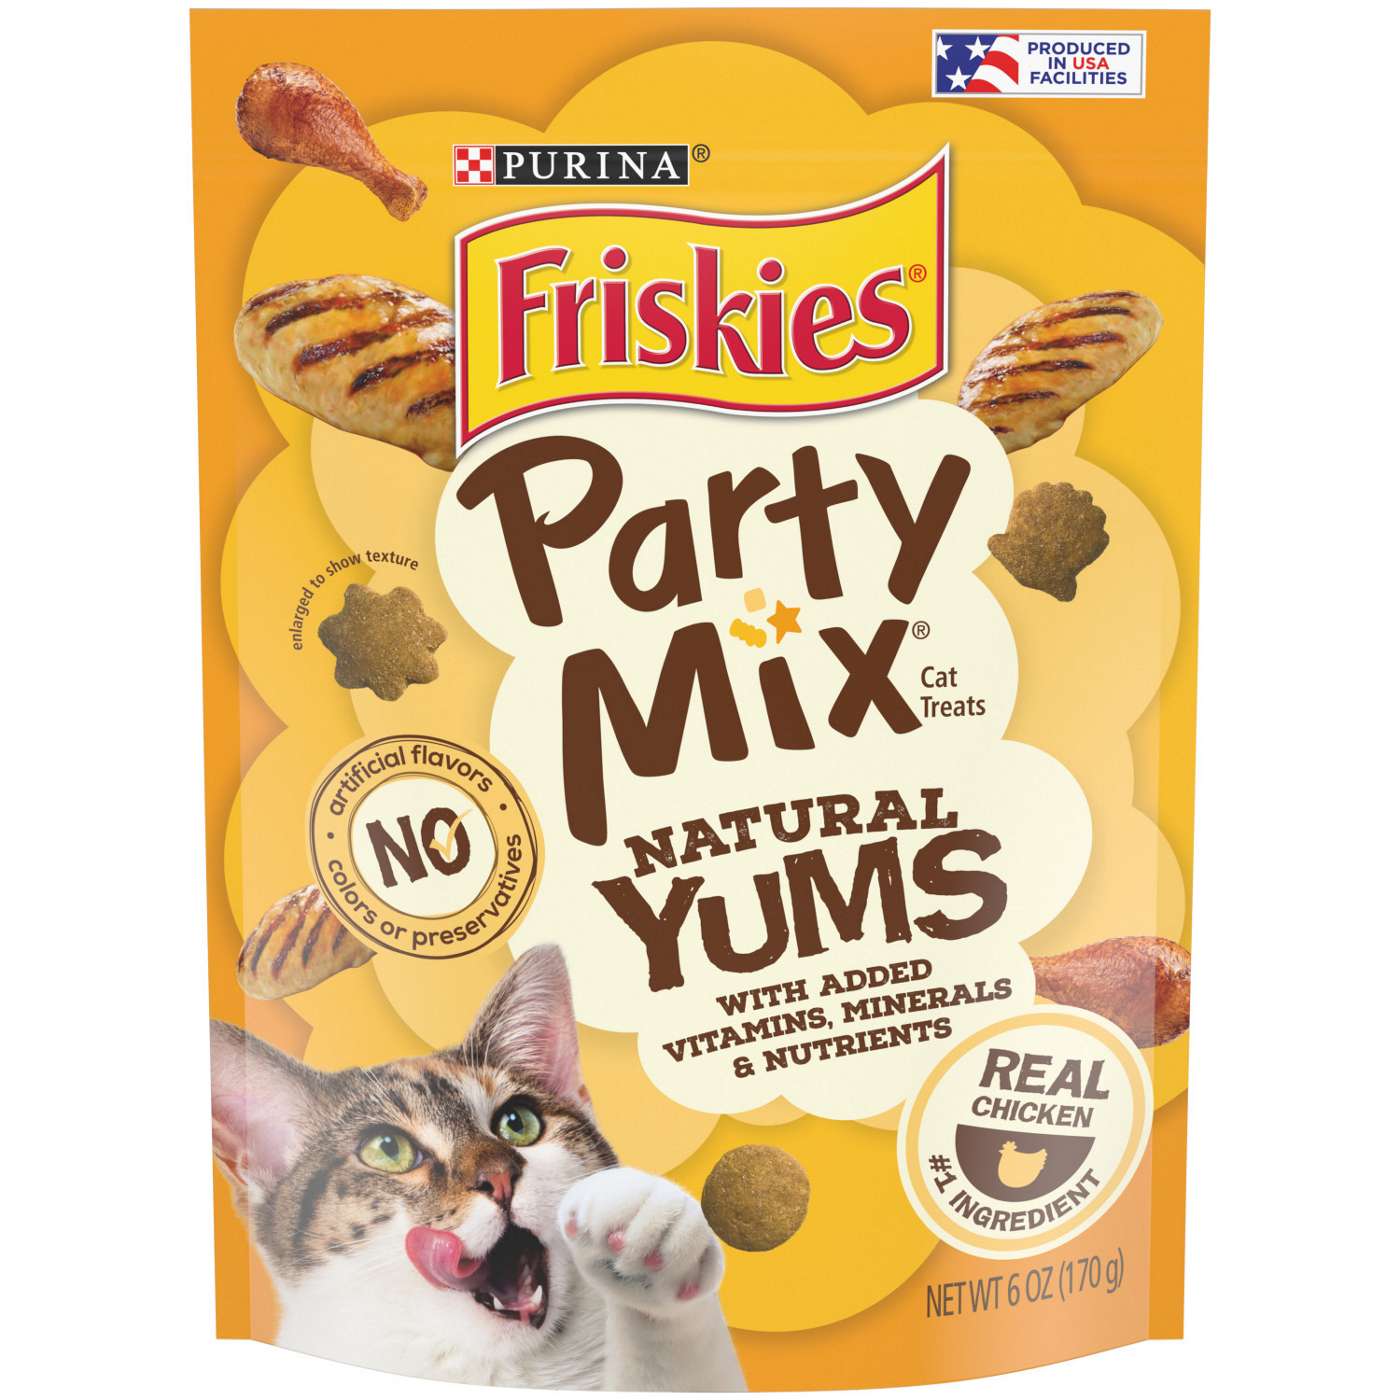 Friskies Purina Friskies Natural Cat Treats, Party Mix Natural Yums With Real Chicken & Vitamins, Minerals & Nutrients; image 1 of 3